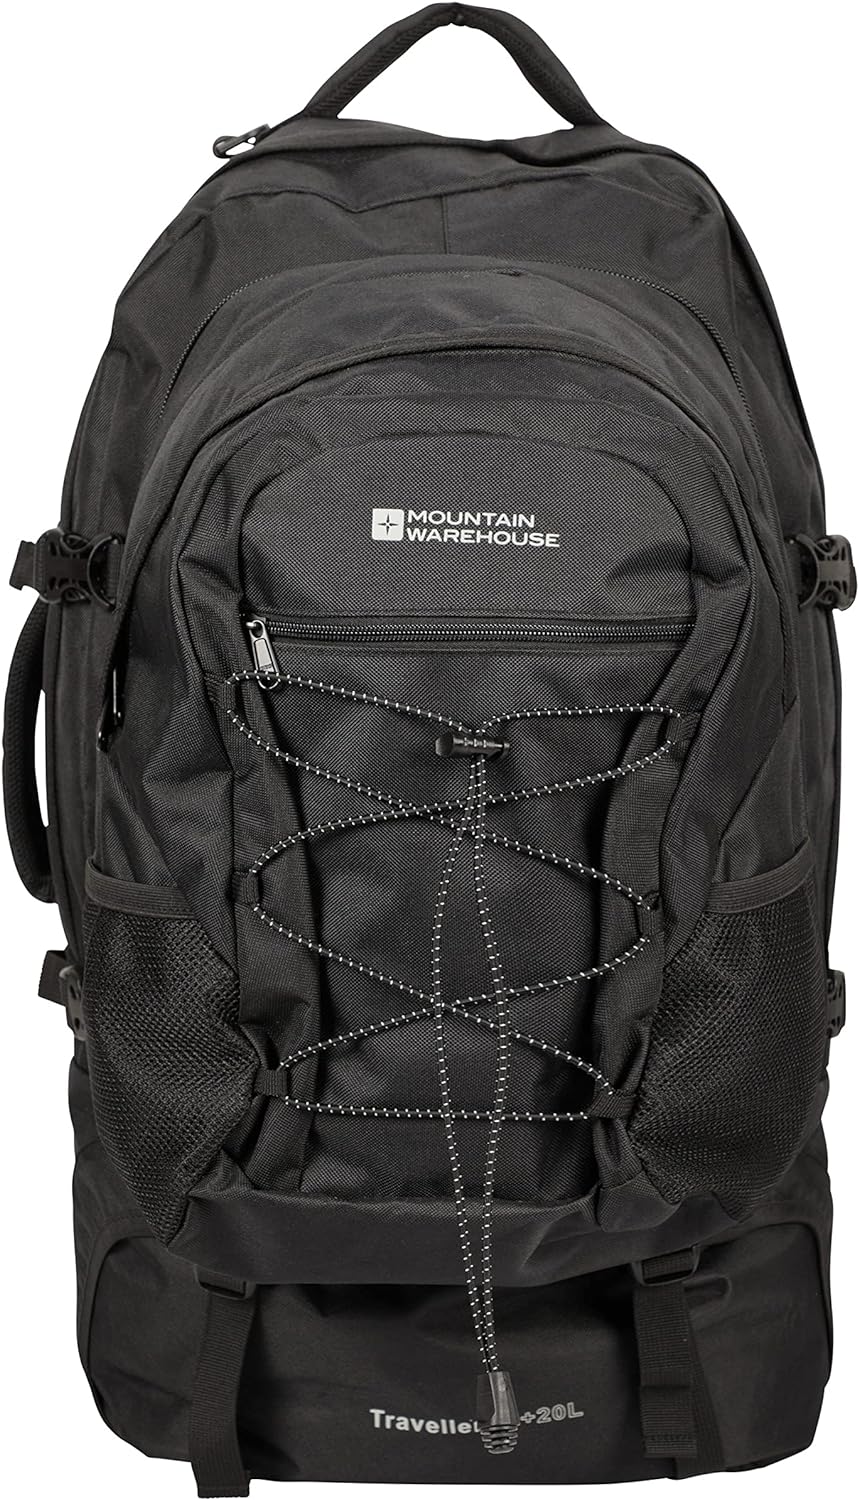 Mountain Warehouse Traveller 60 + 20L Rucksack - Durable Backpack with Rain Cover, Detachable Daypack, Adjustable Back Support - Great for Camping, Hiking, Travelling